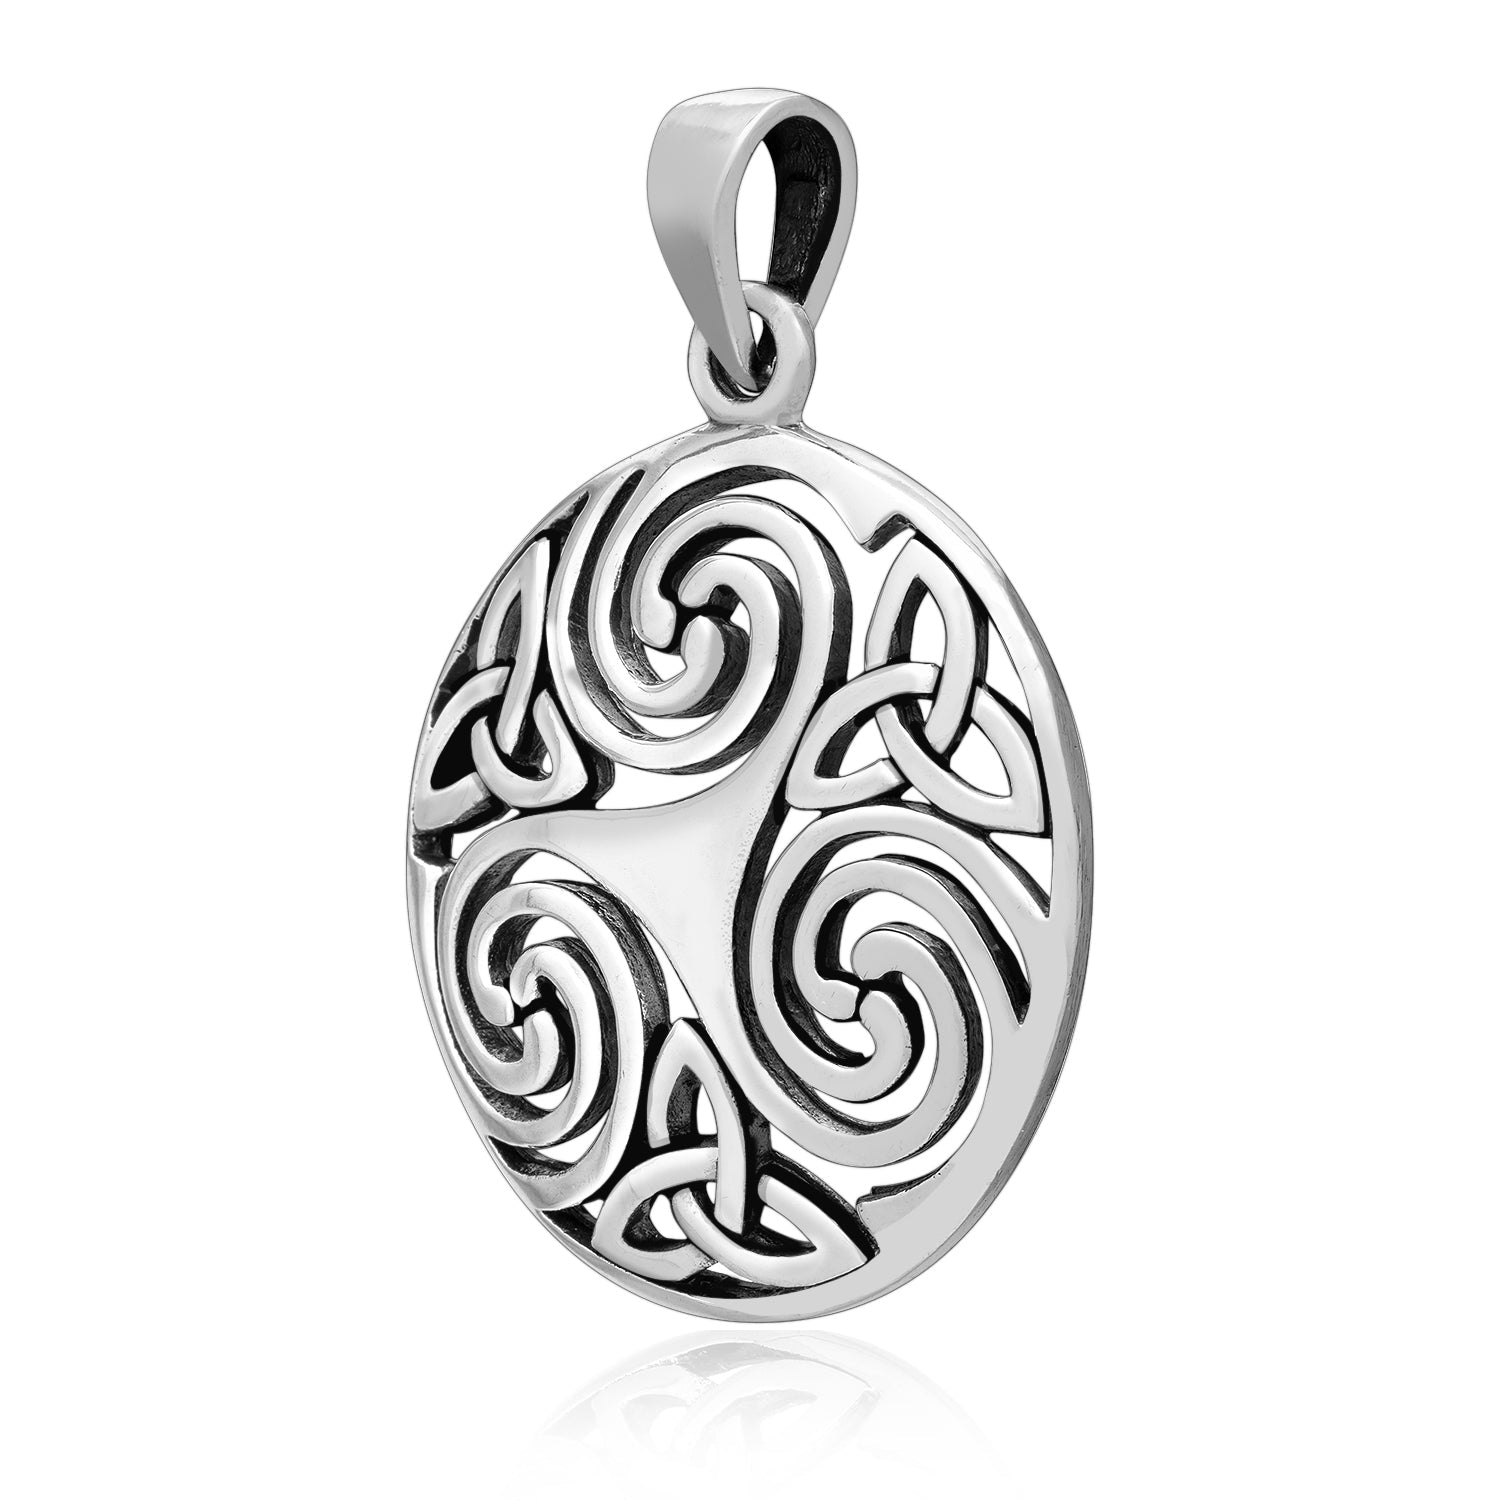 925 Sterling Silver with Celtic Triskelion Pendant